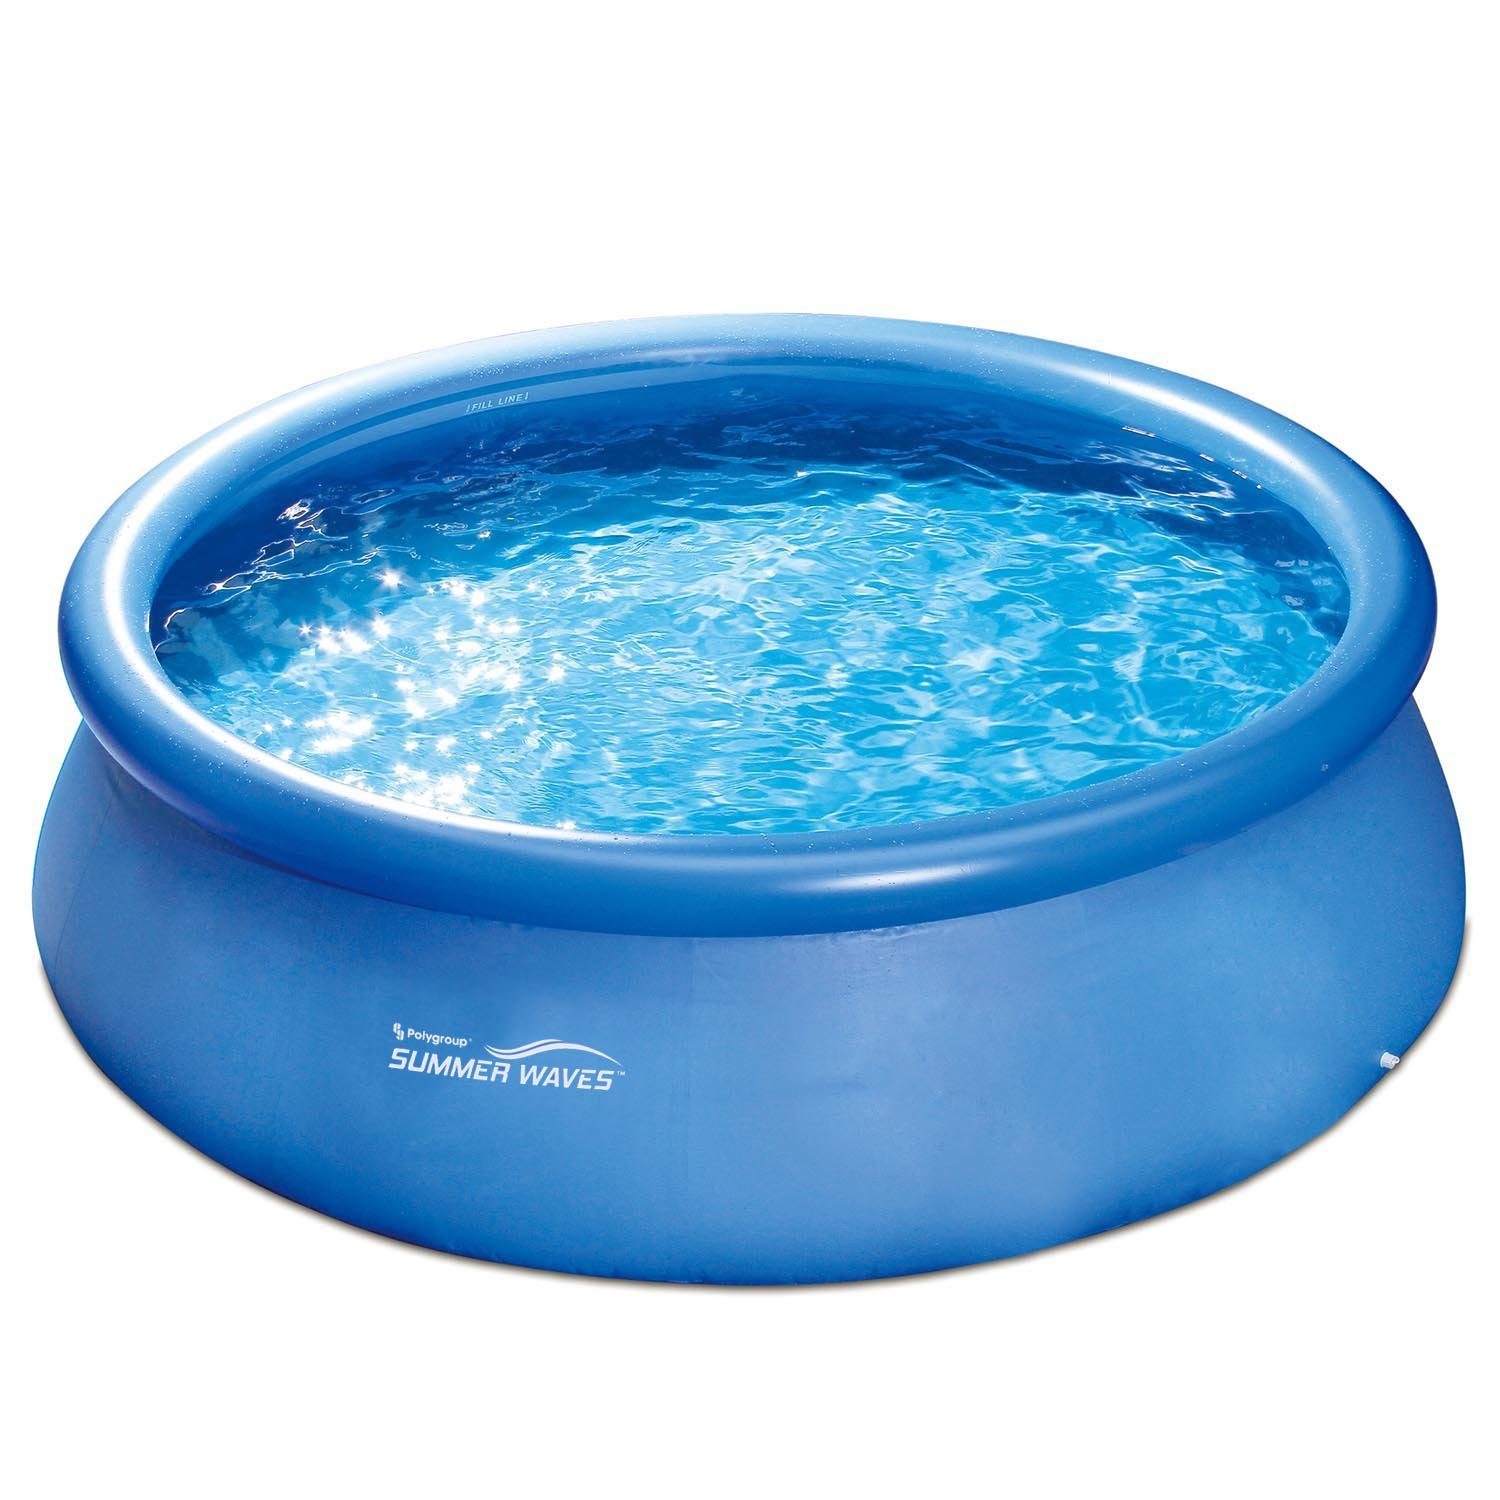 SUMMER WAVES Quick-Up Pool Fast Set, Pool 366x91cm Swimming Pool Familien Schwimmbad mit Filterpumpe